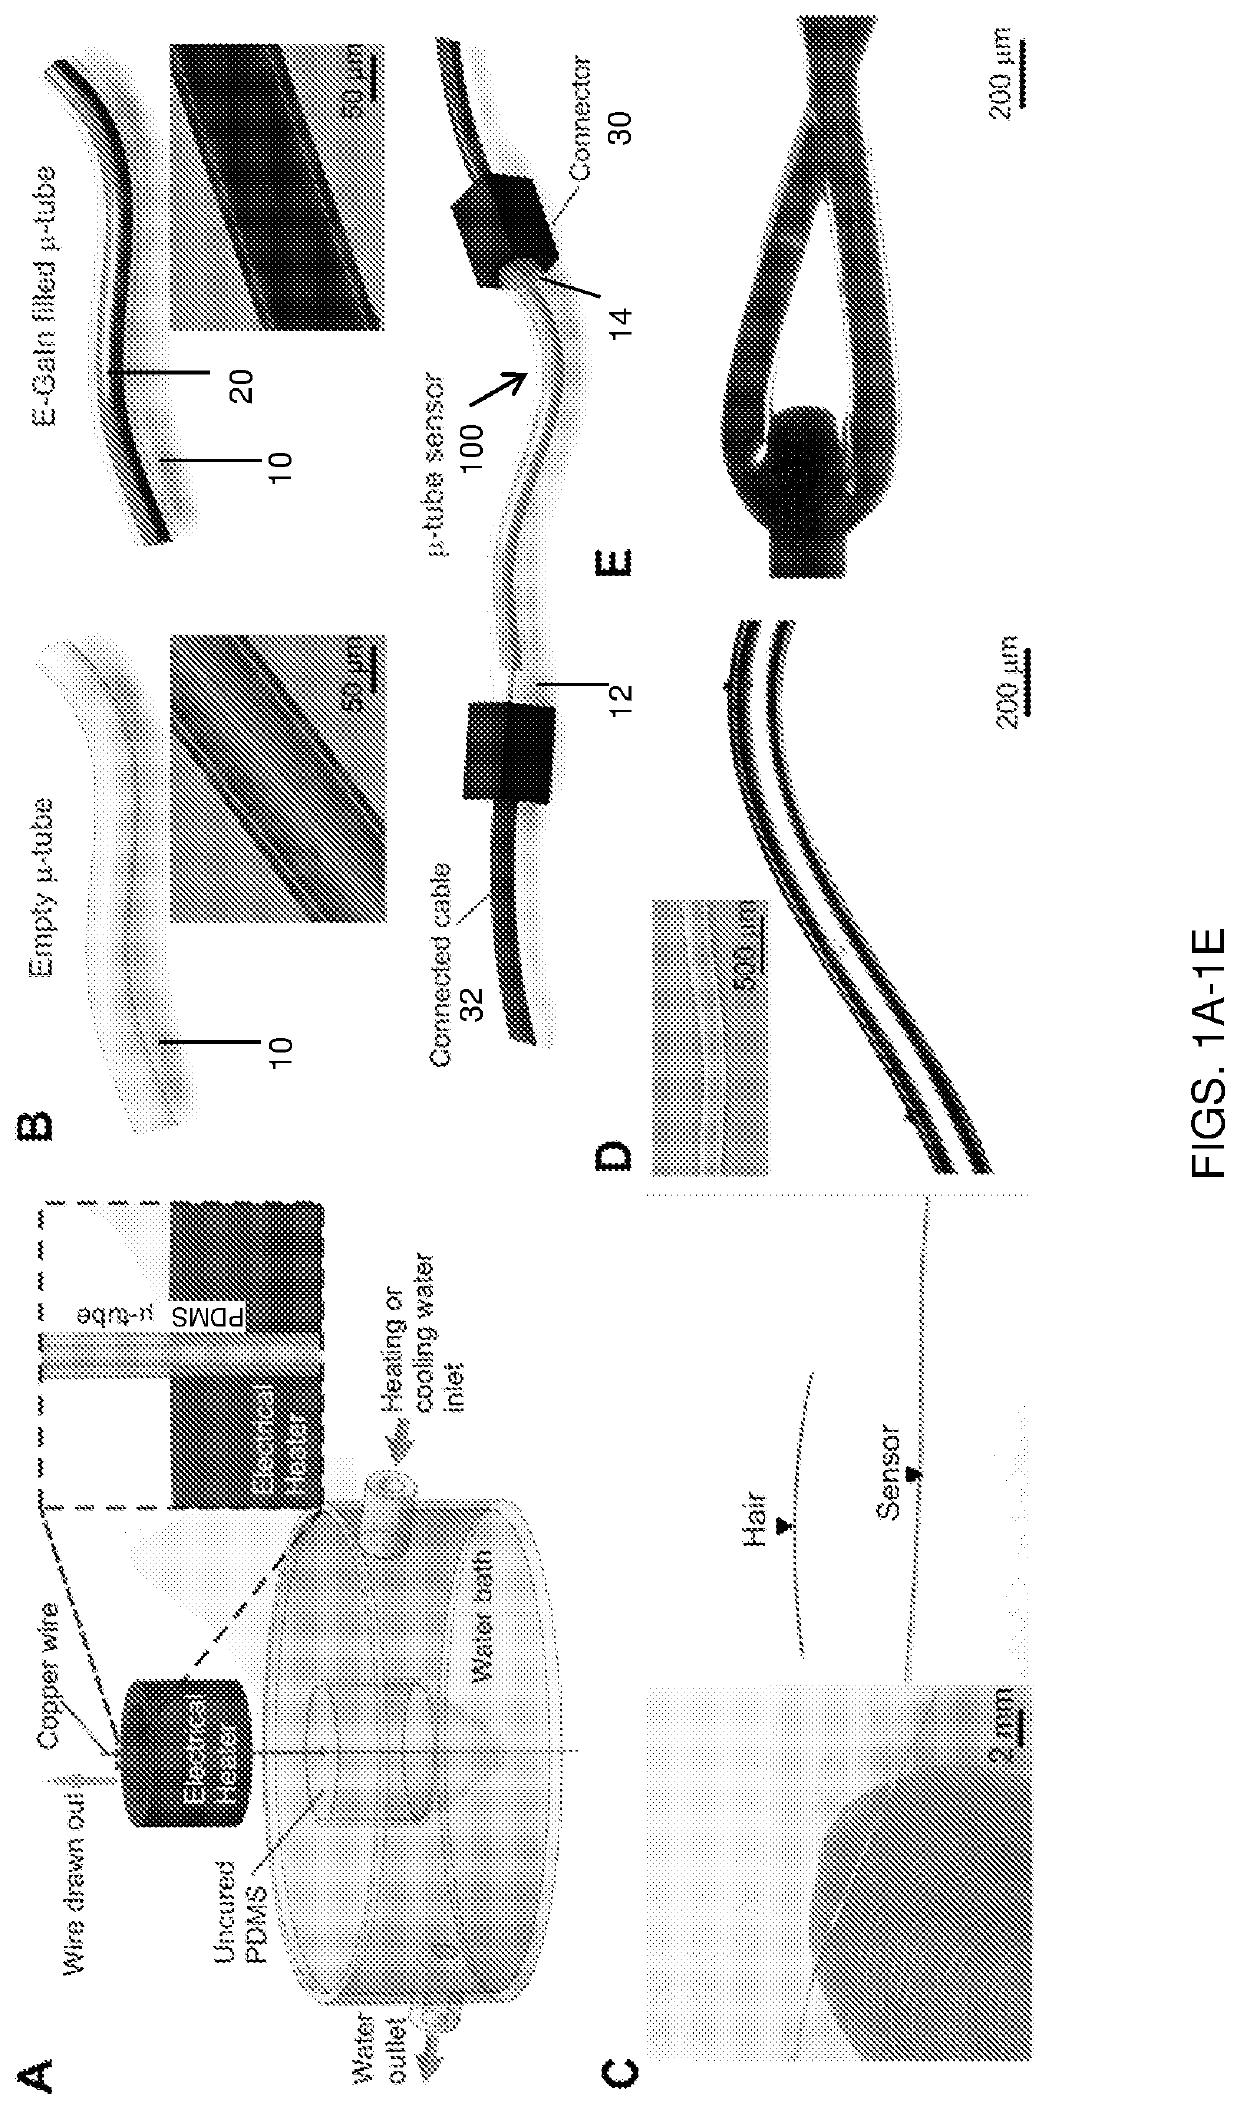 Microtube Sensor For Physiological Monitoring